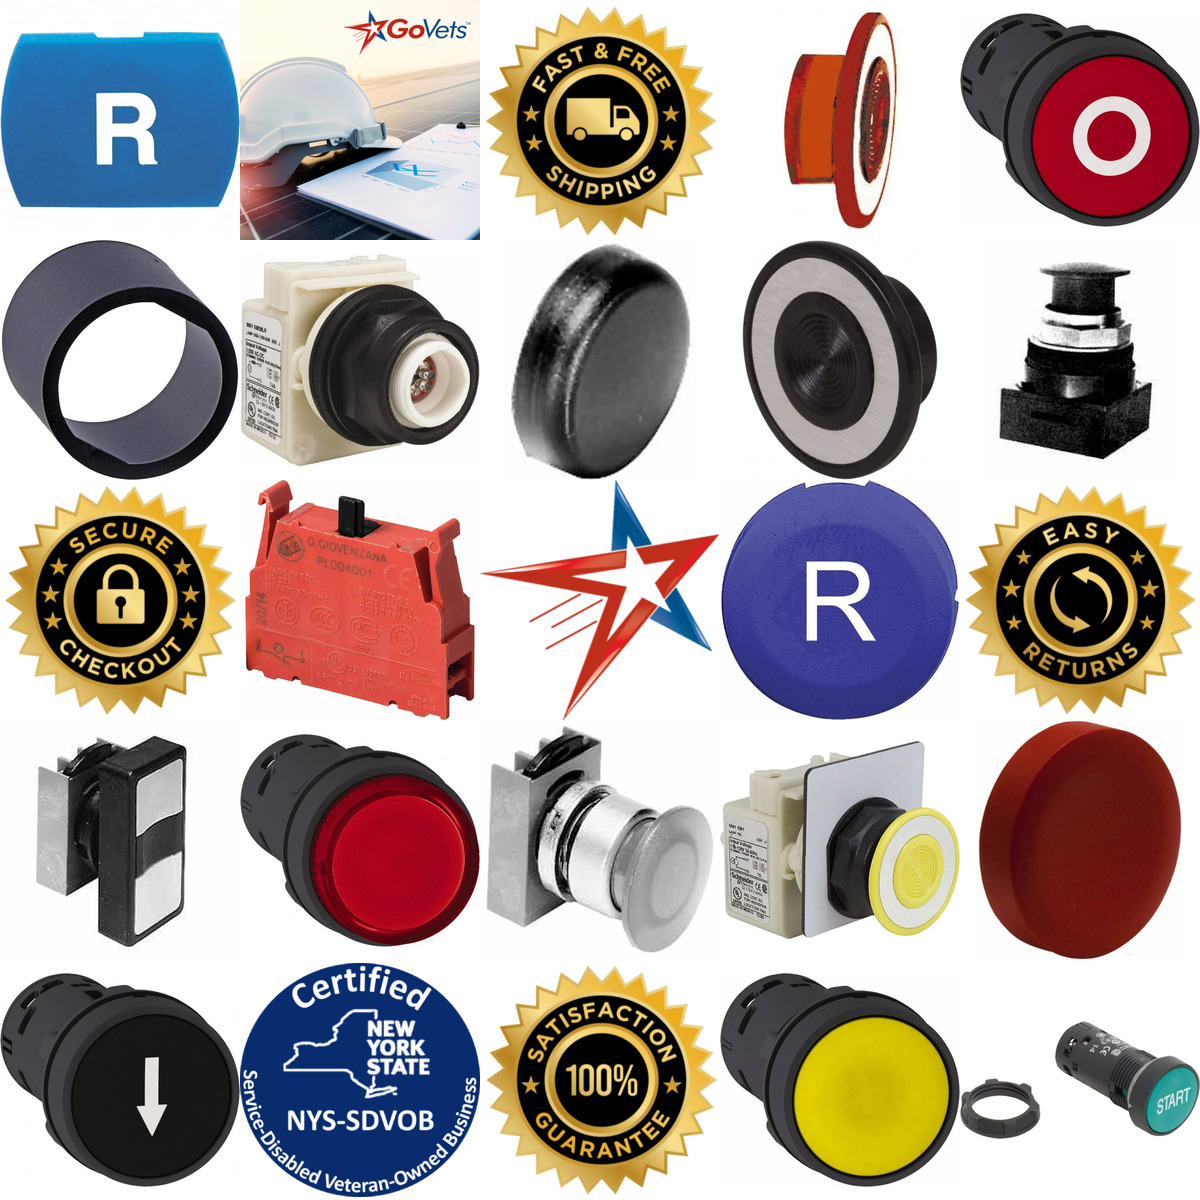 A selection of Pushbutton Switch Accessories products on GoVets